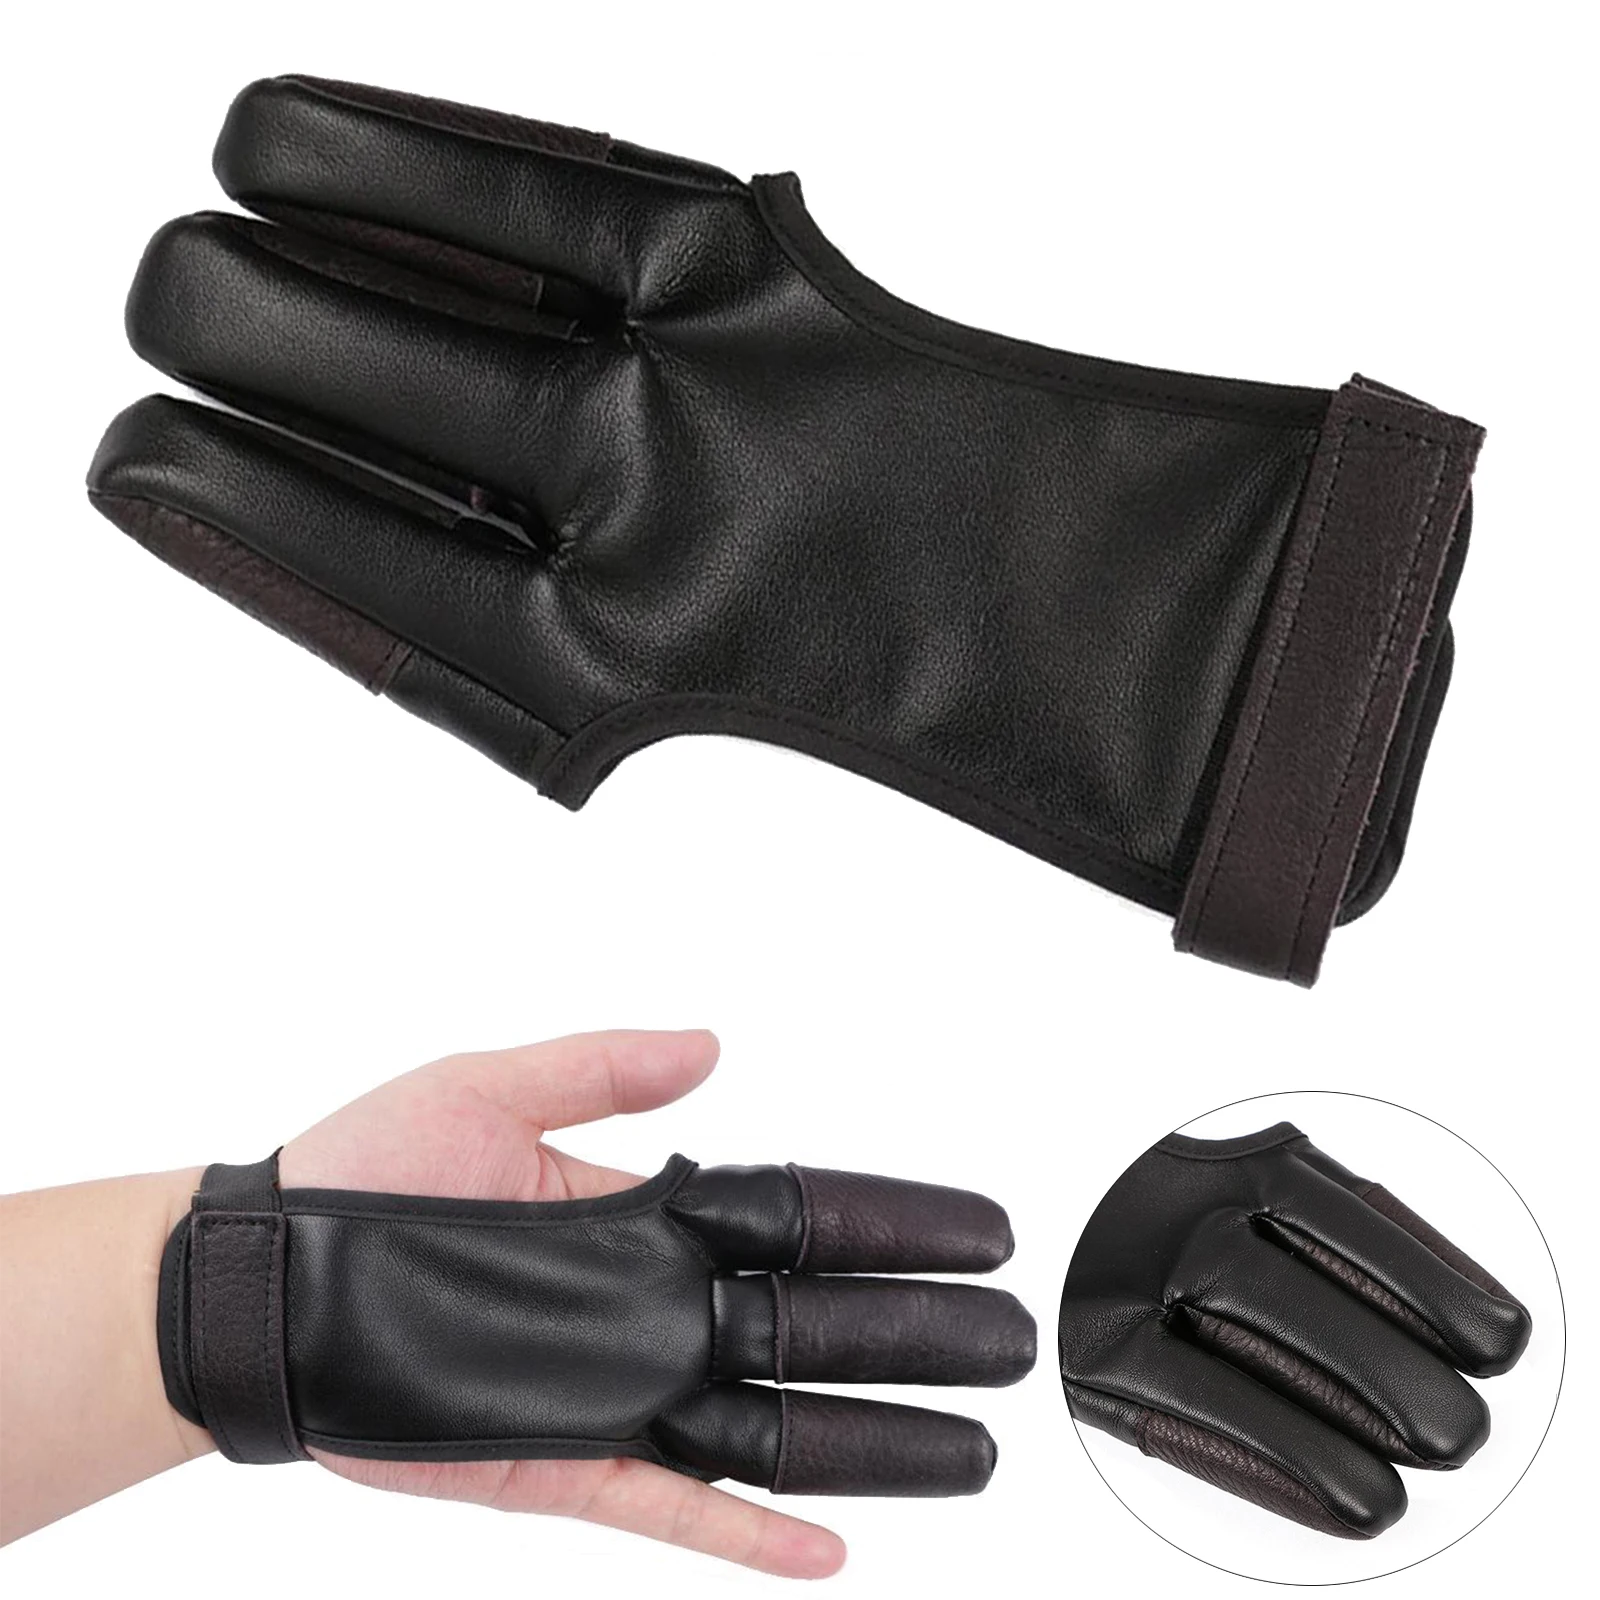 Non- Archery Glove 3-Finger Leather Archery Training Practicing Fingers Protective Gloves Shooting Gloves for Kids Adult